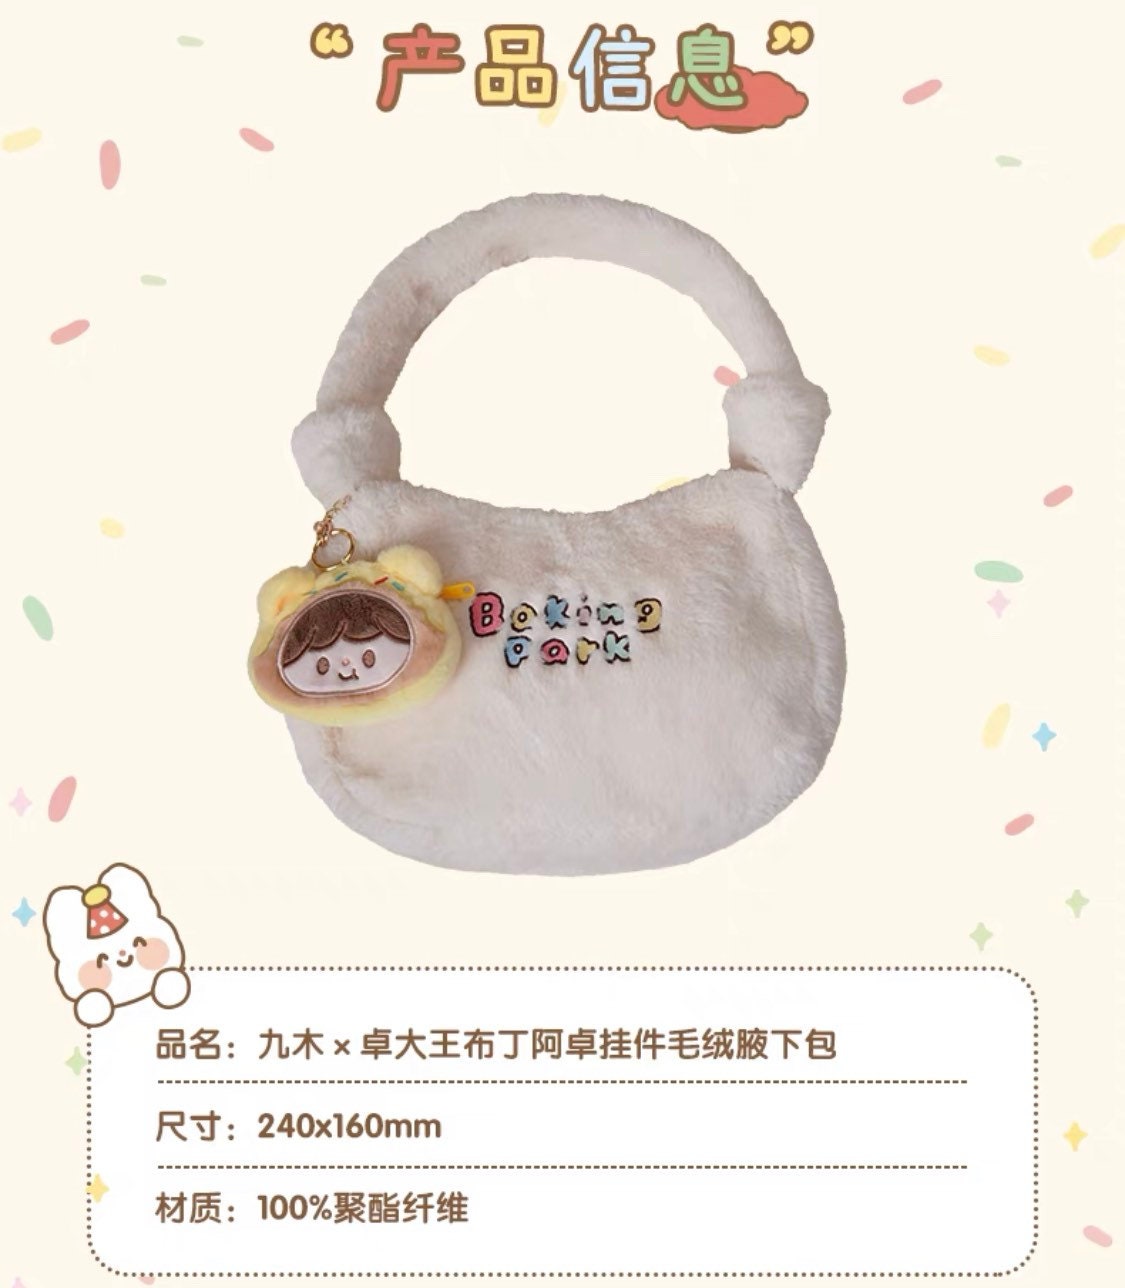 Molinta 「Baking Park」series stationery plush bag with pudding toy